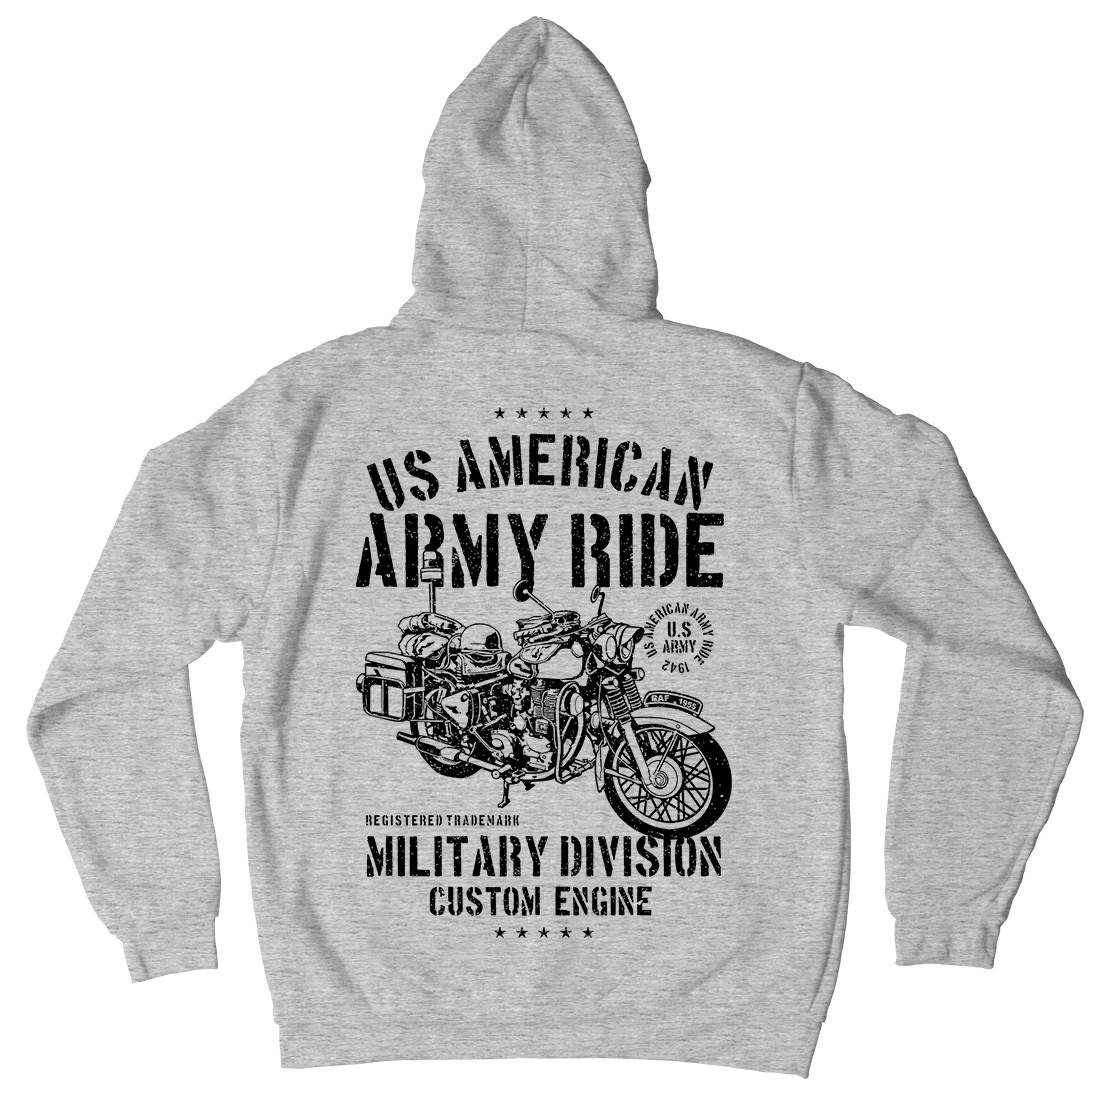 Ride Mens Hoodie With Pocket Army A613